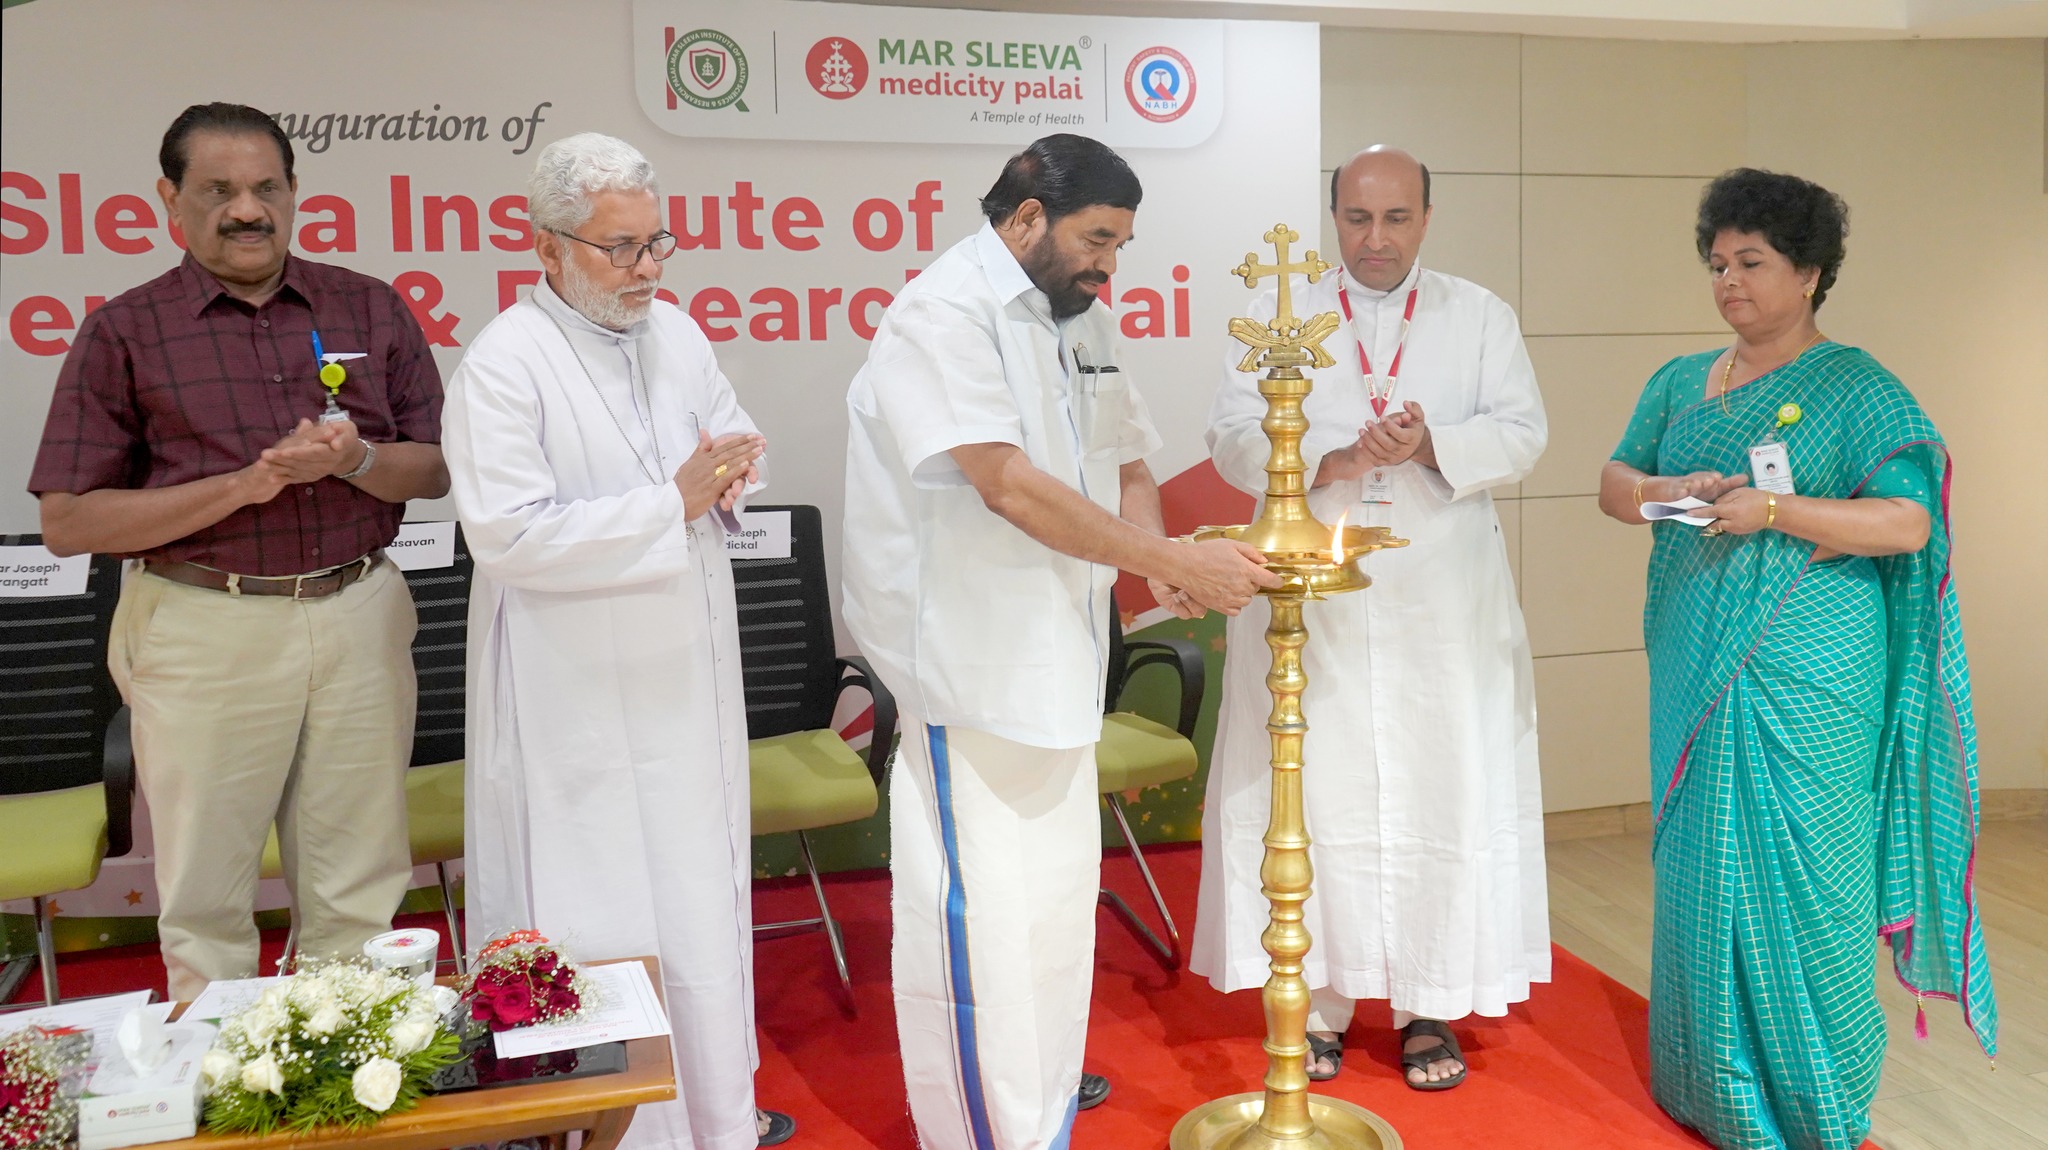 Inauguration of Mar Sleeva Institute of Health Sciences & Research Palai